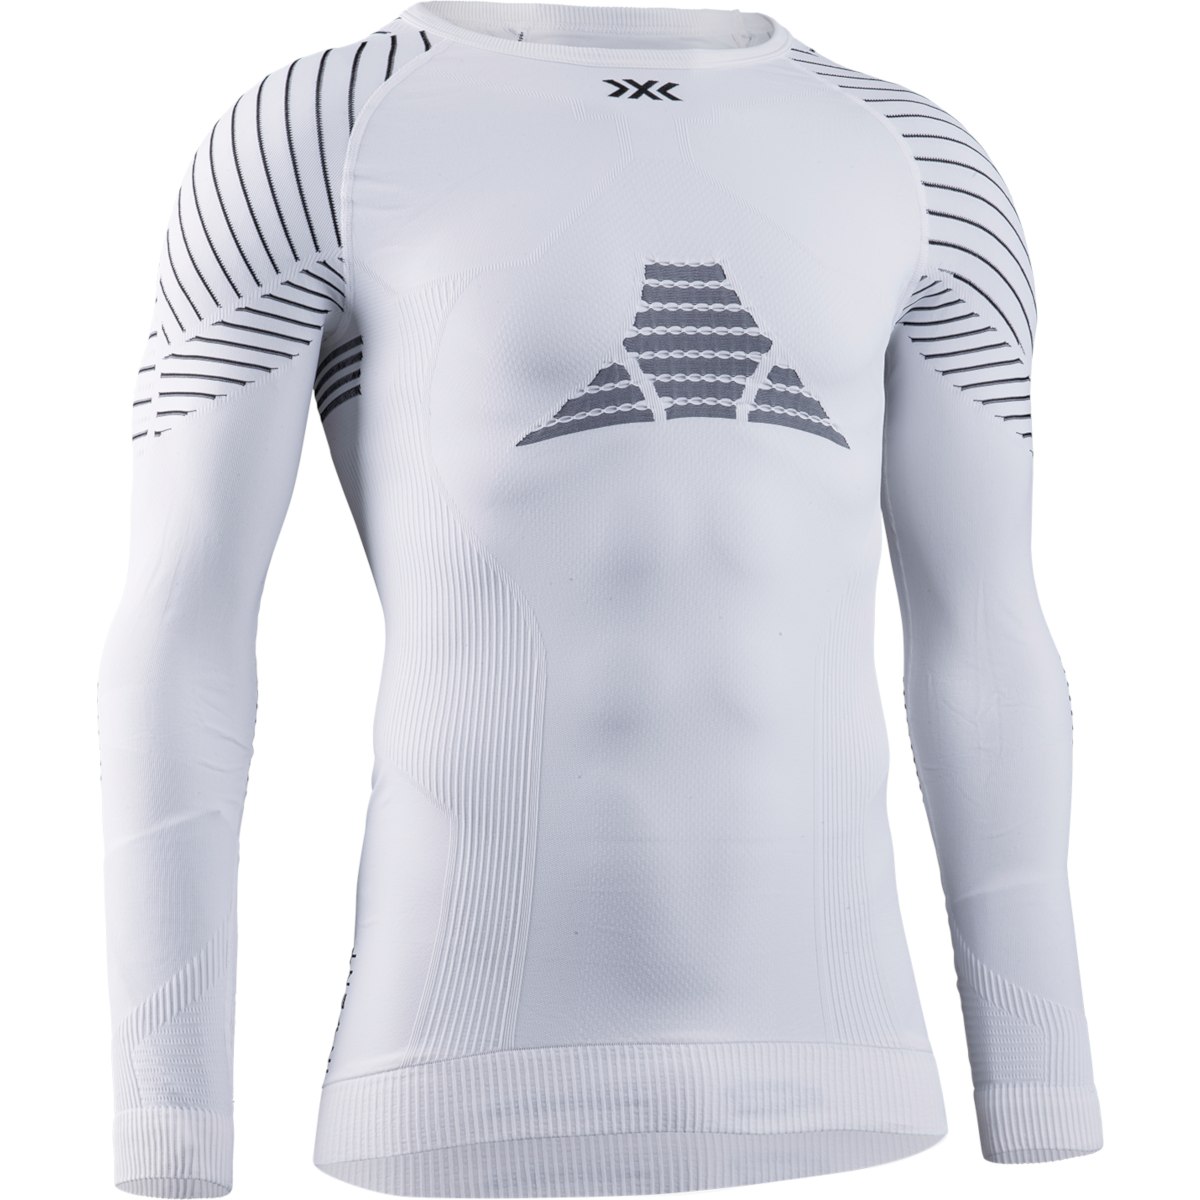 Picture of X-Bionic Invent 4.0 Shirt Round Neck Long Sleeves Shirt for Men - white/black